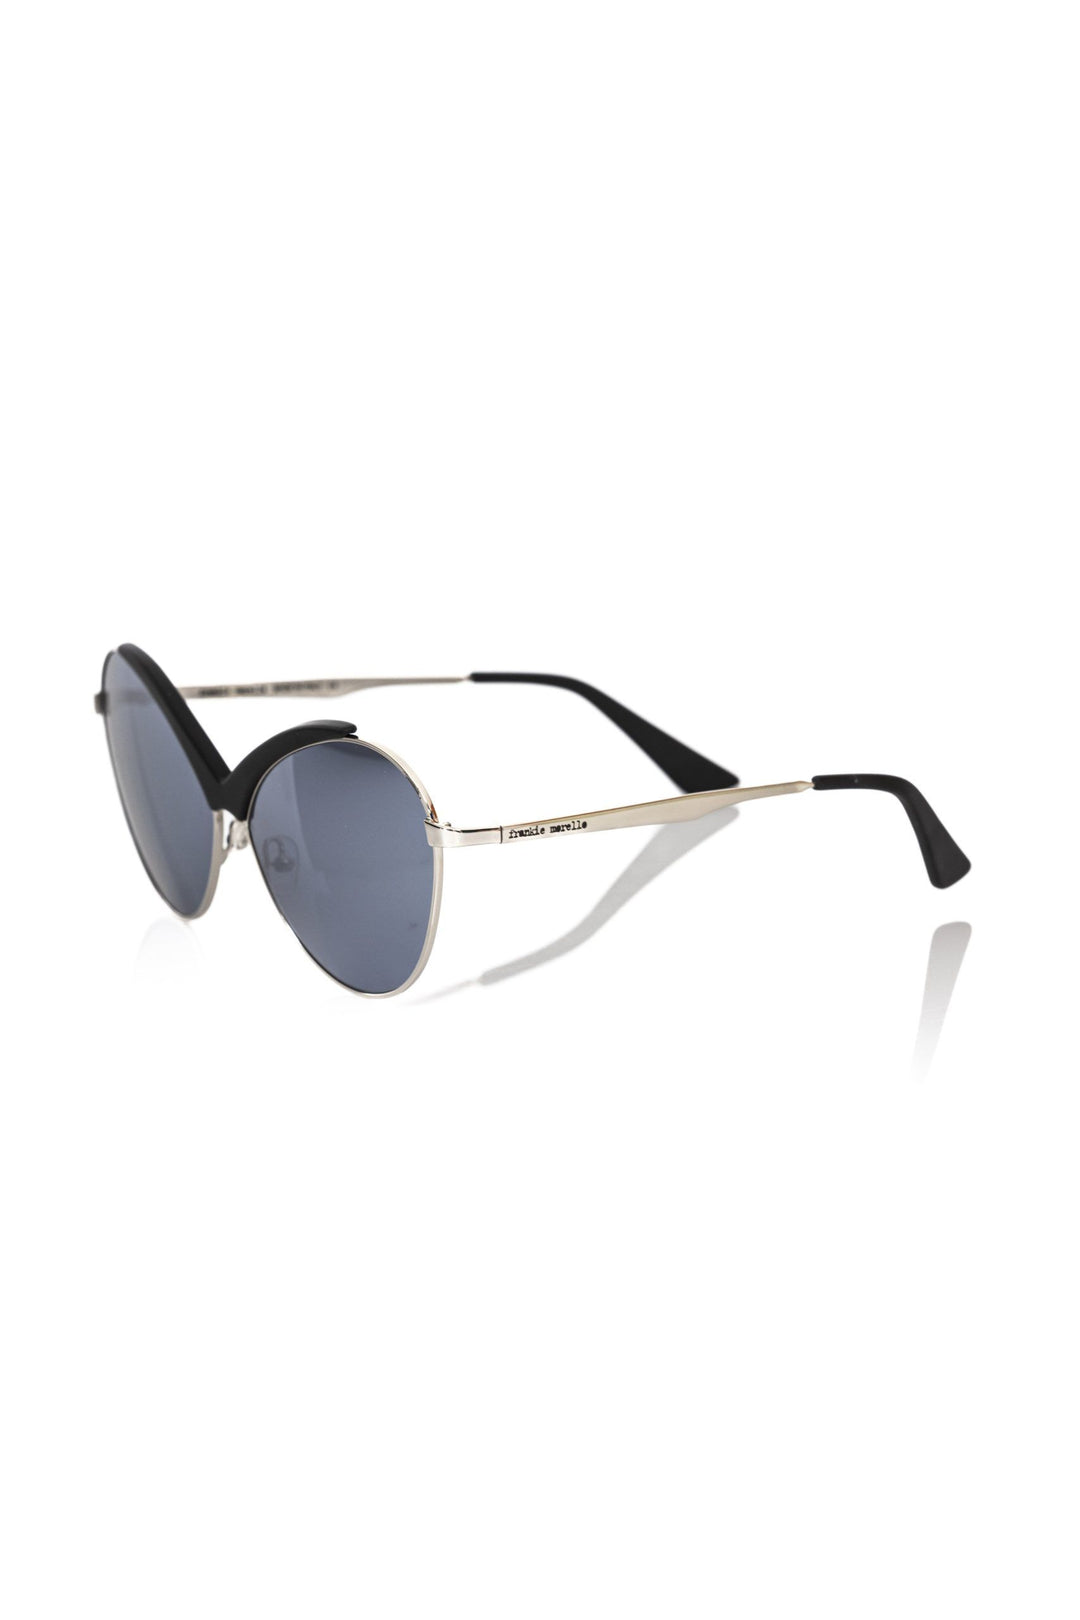 Frankie Morello Chic Butterfly-Shaped Metal Sunglasses